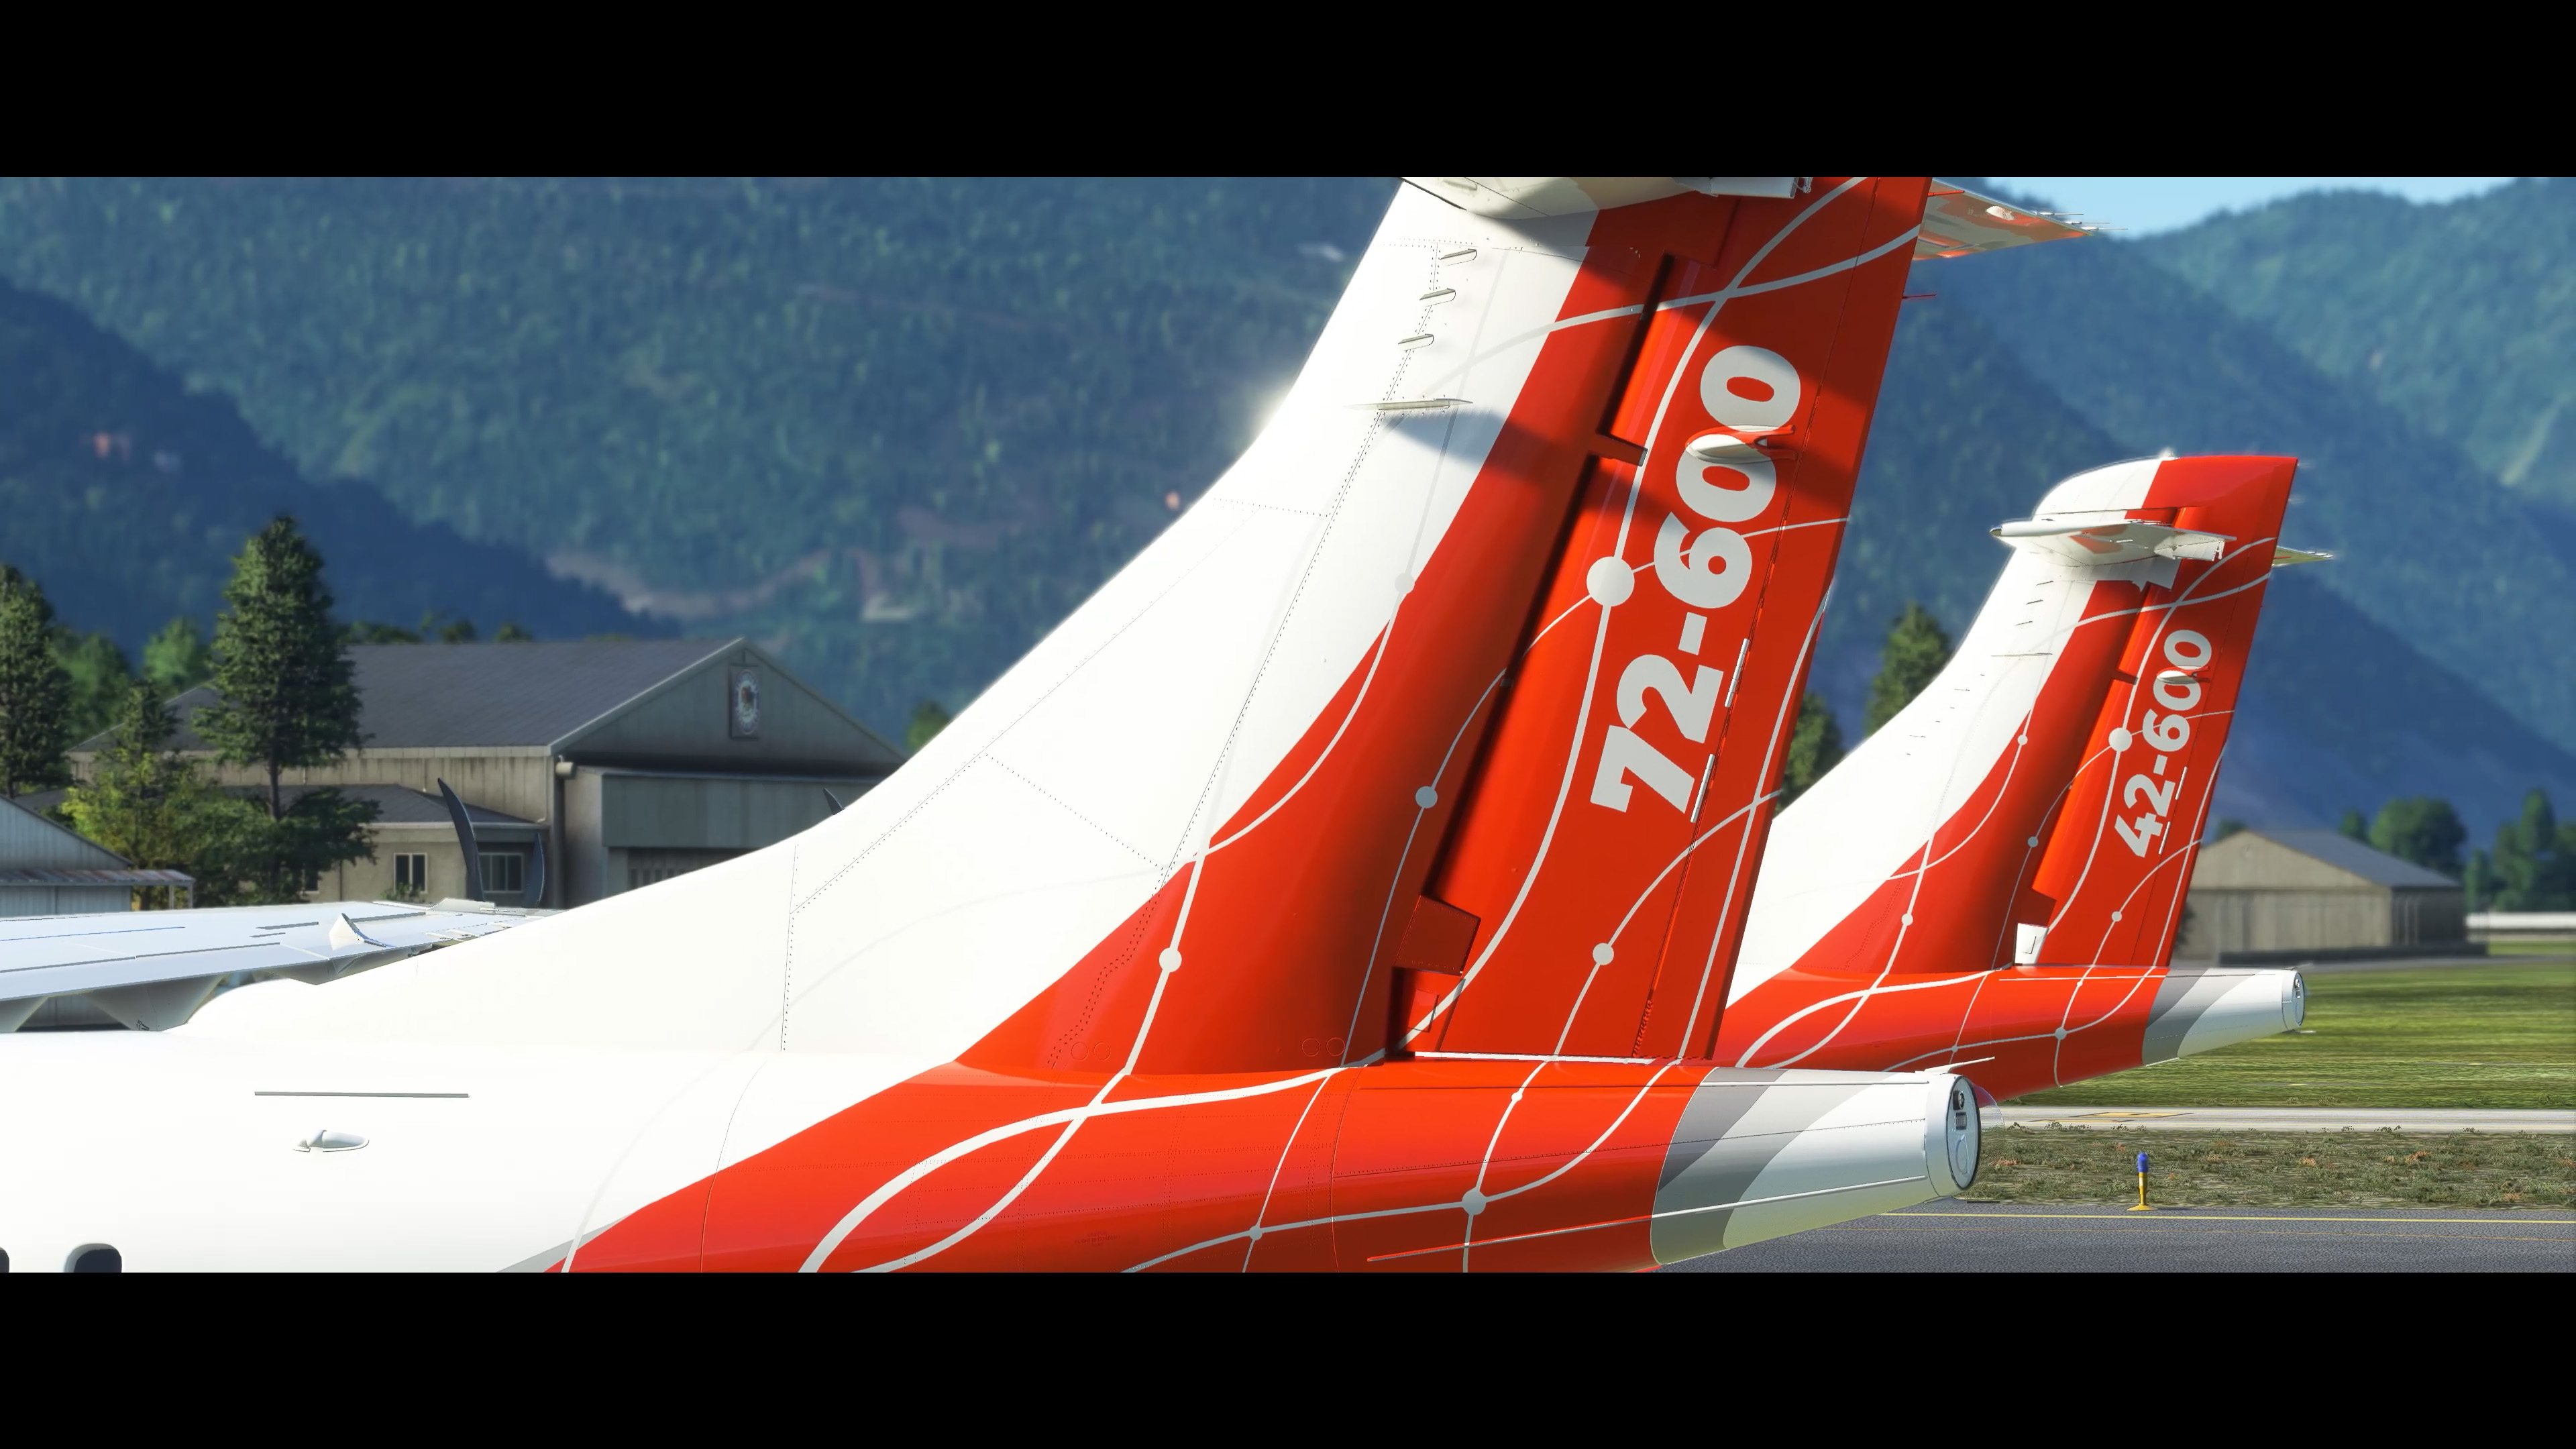 Microsoft Flight Simulator Releases the First Aircraft in the New Expert  Series – the ATR 42-600 and the ATR 72-600 - Xbox Wire